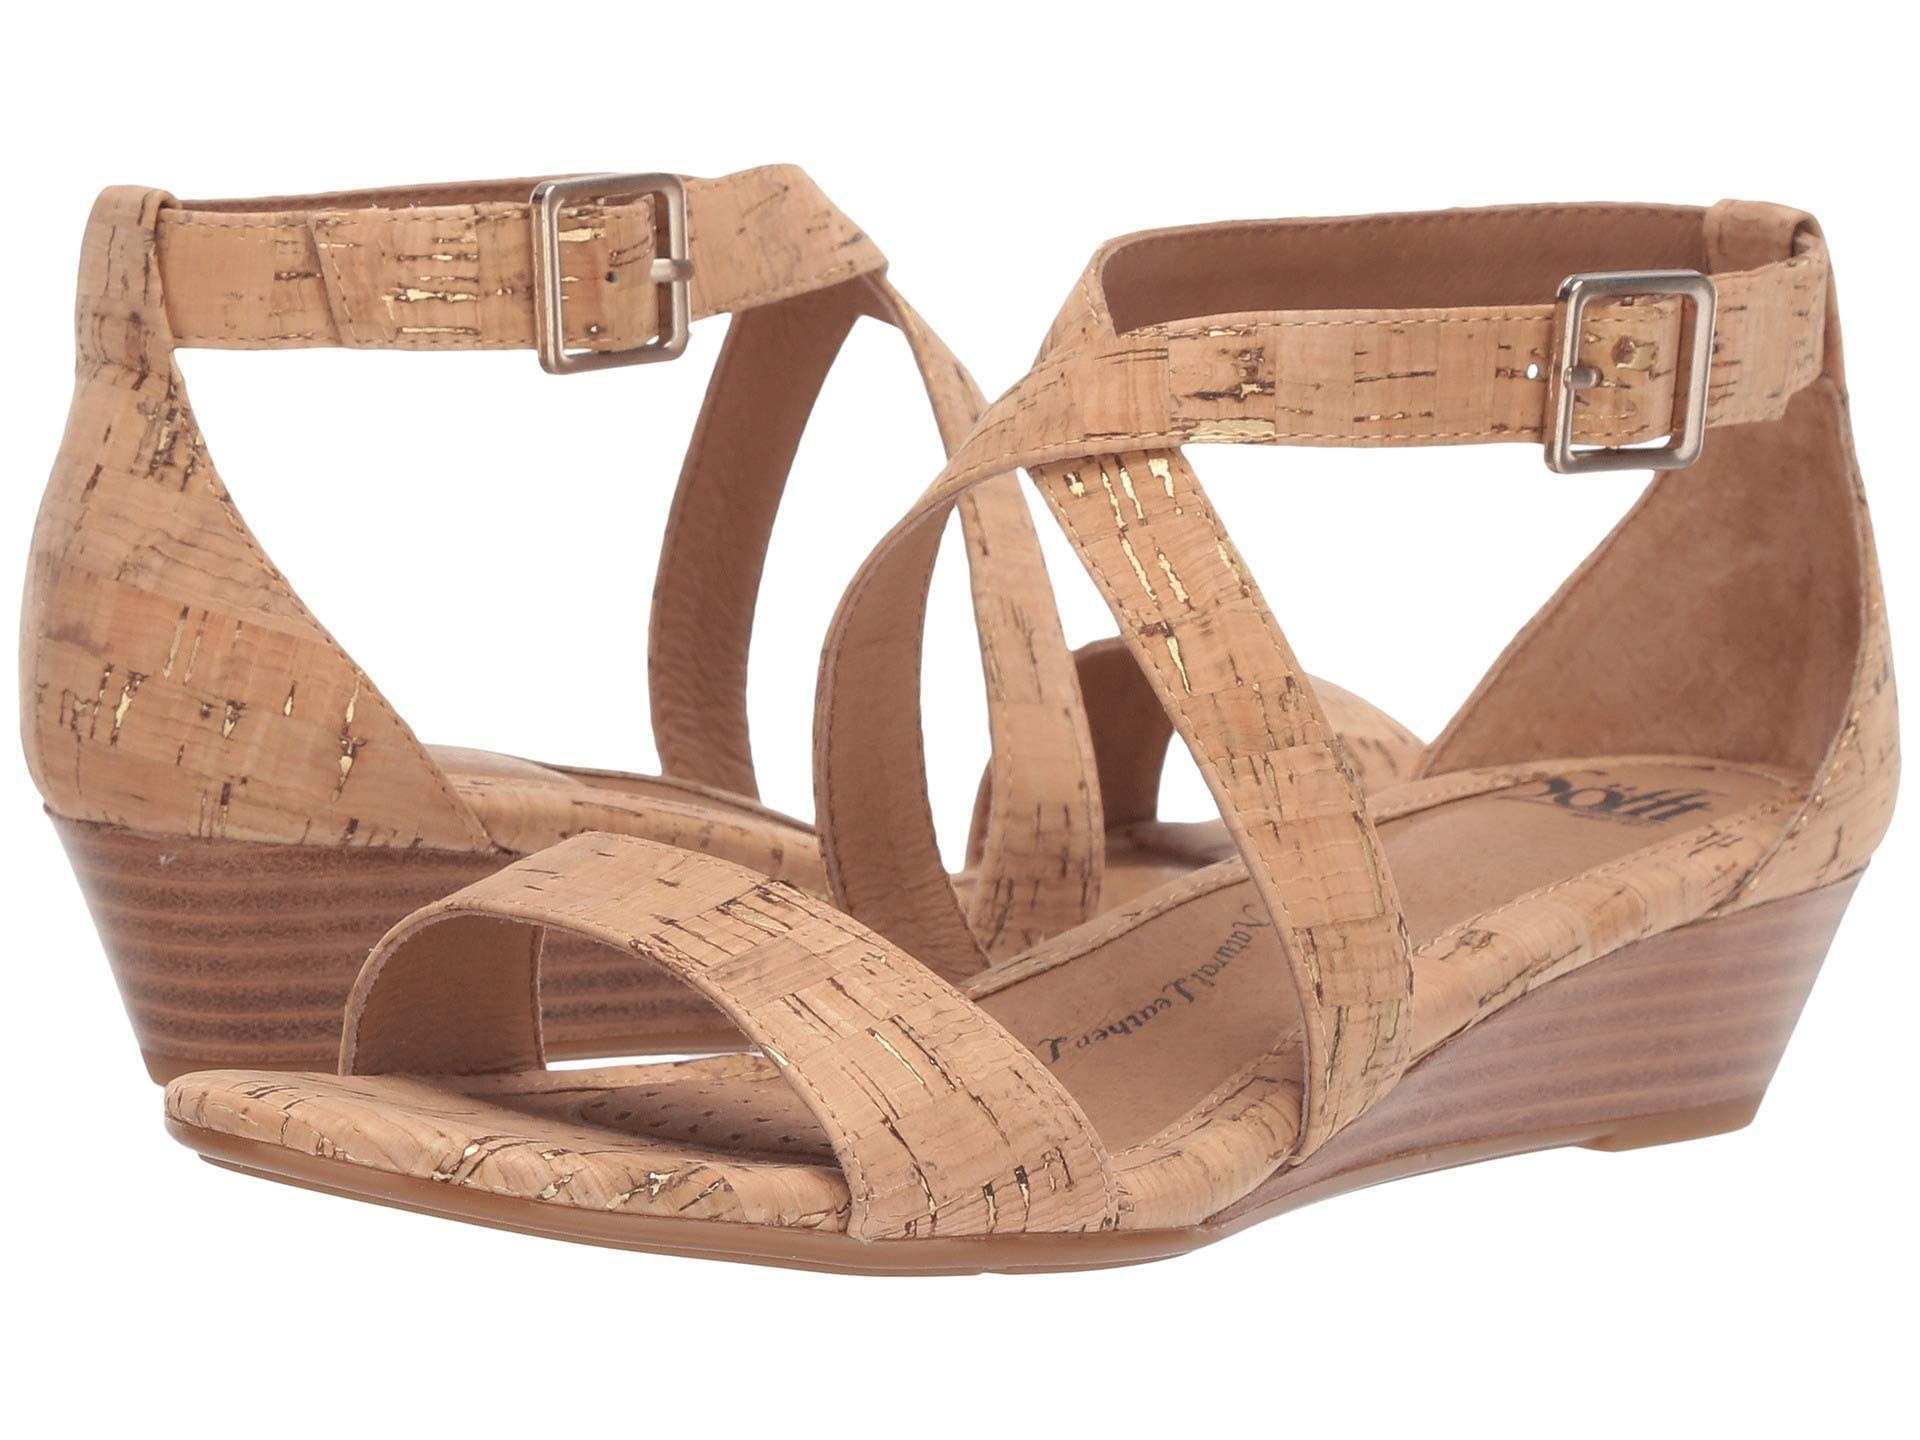 The Soft, strappy suede wedges in gold and natural cork. 